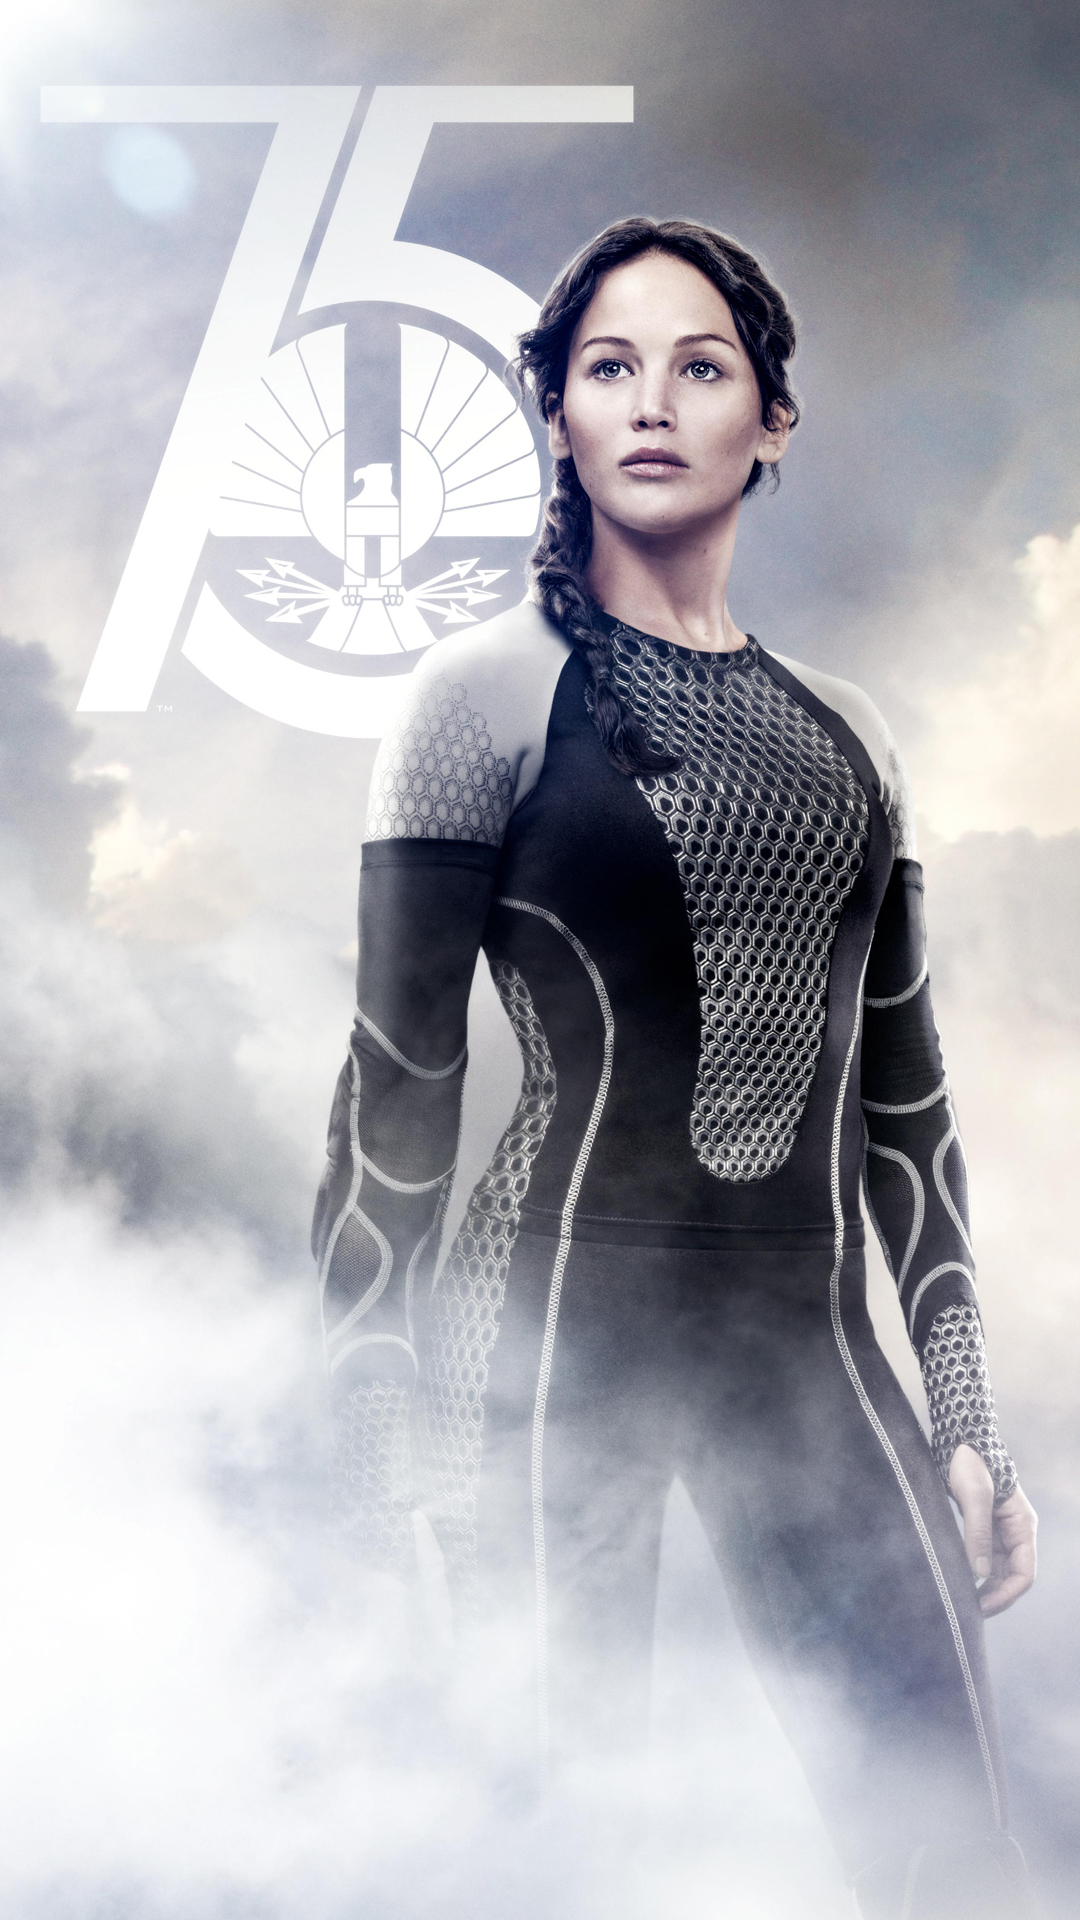 Hunger Games Iphone Wallpapers